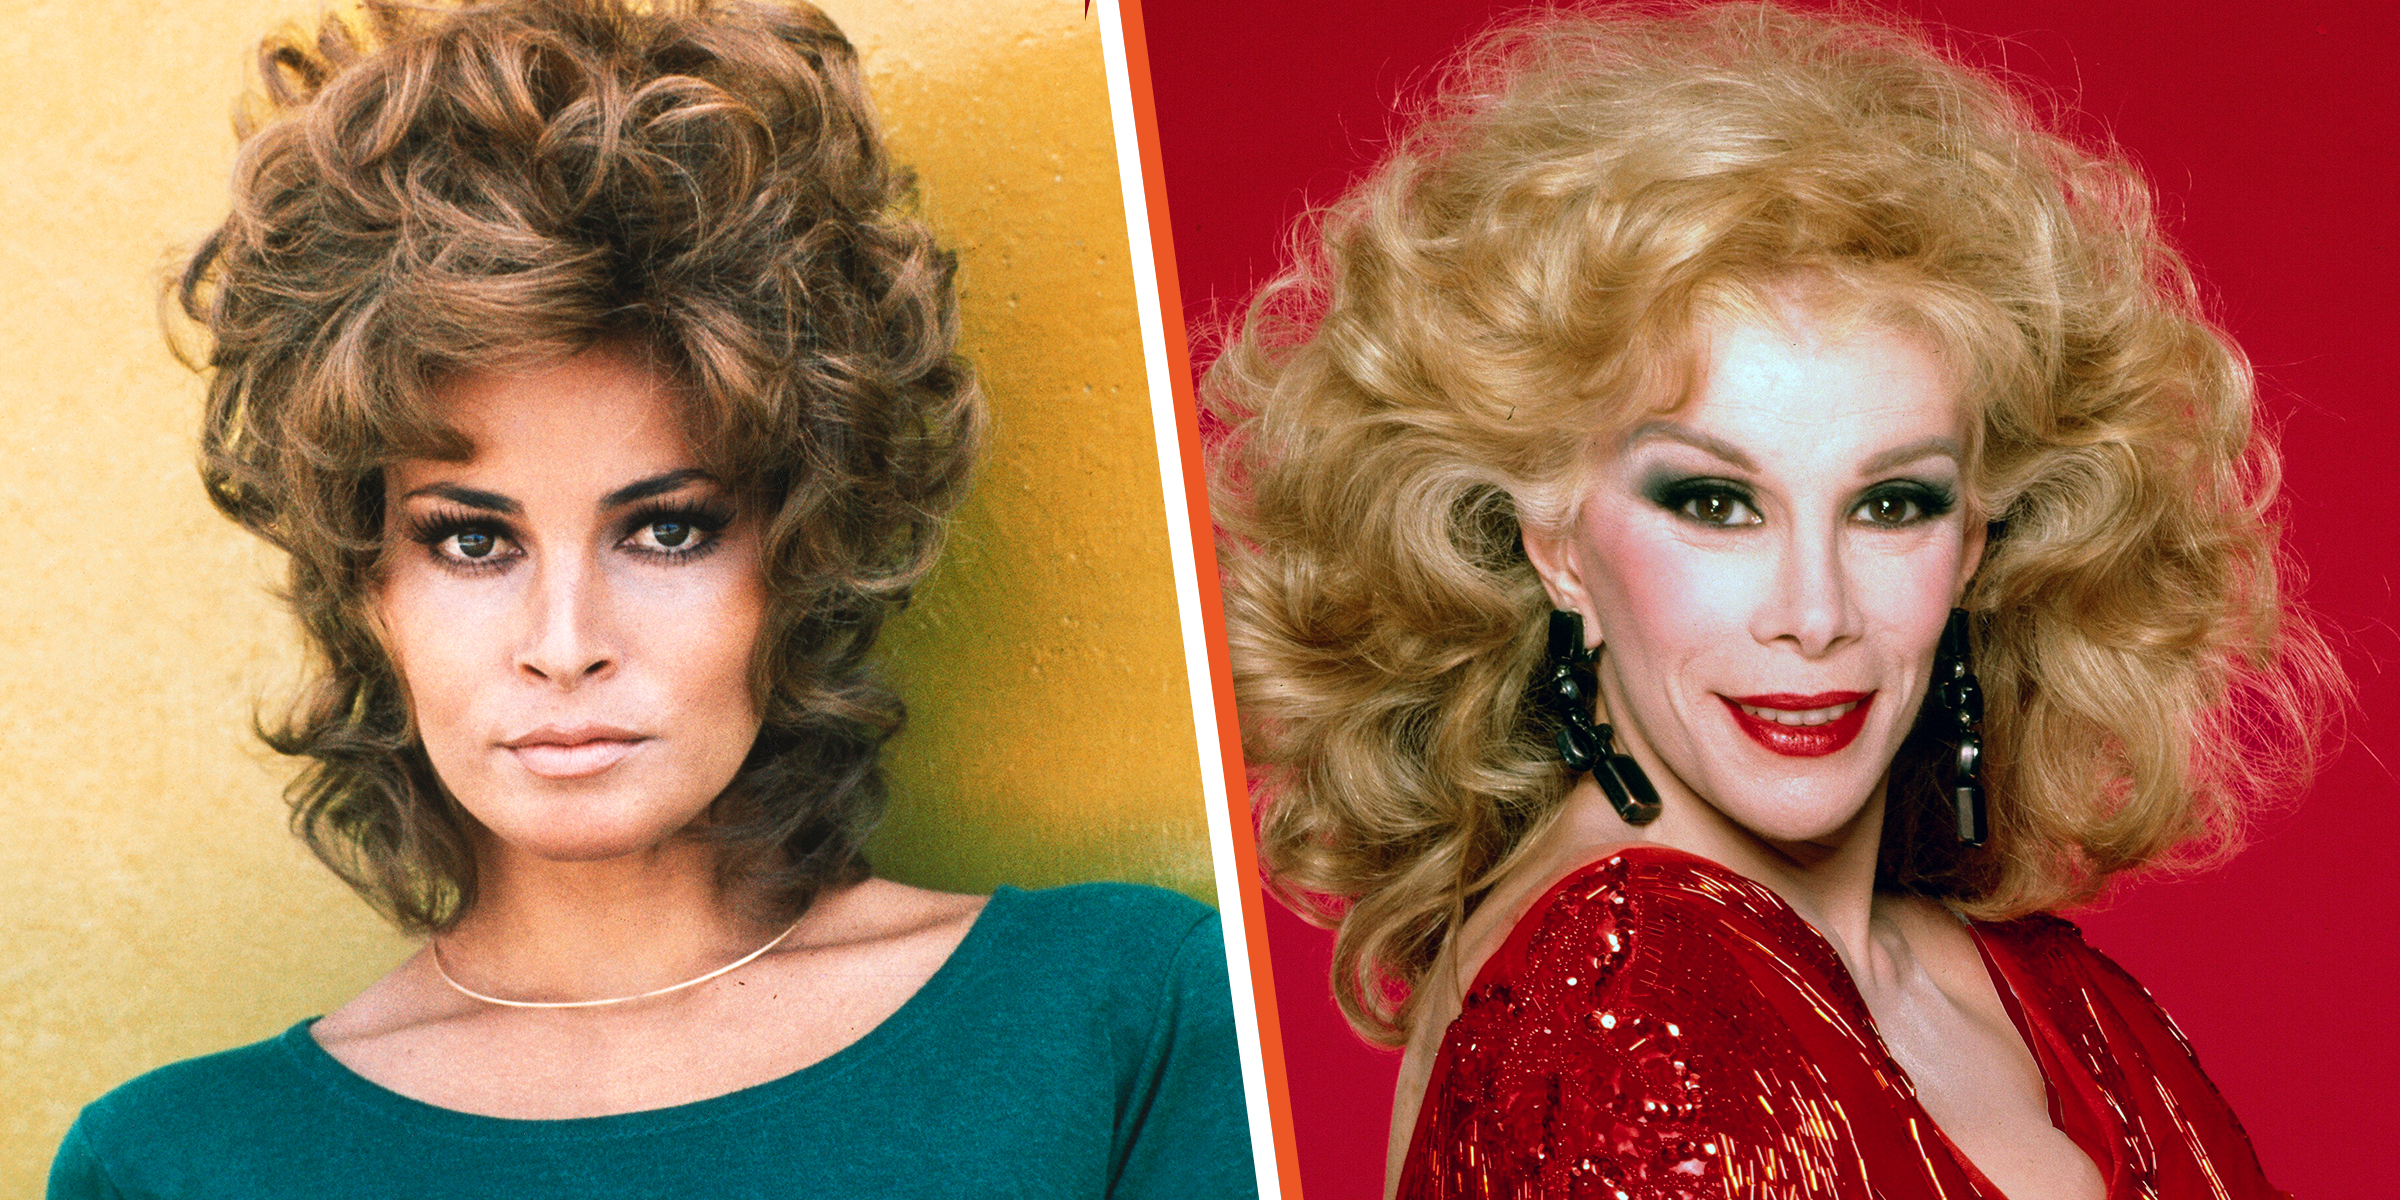 Raquel Welch | Joan Rivers | Fuente: Getty Images